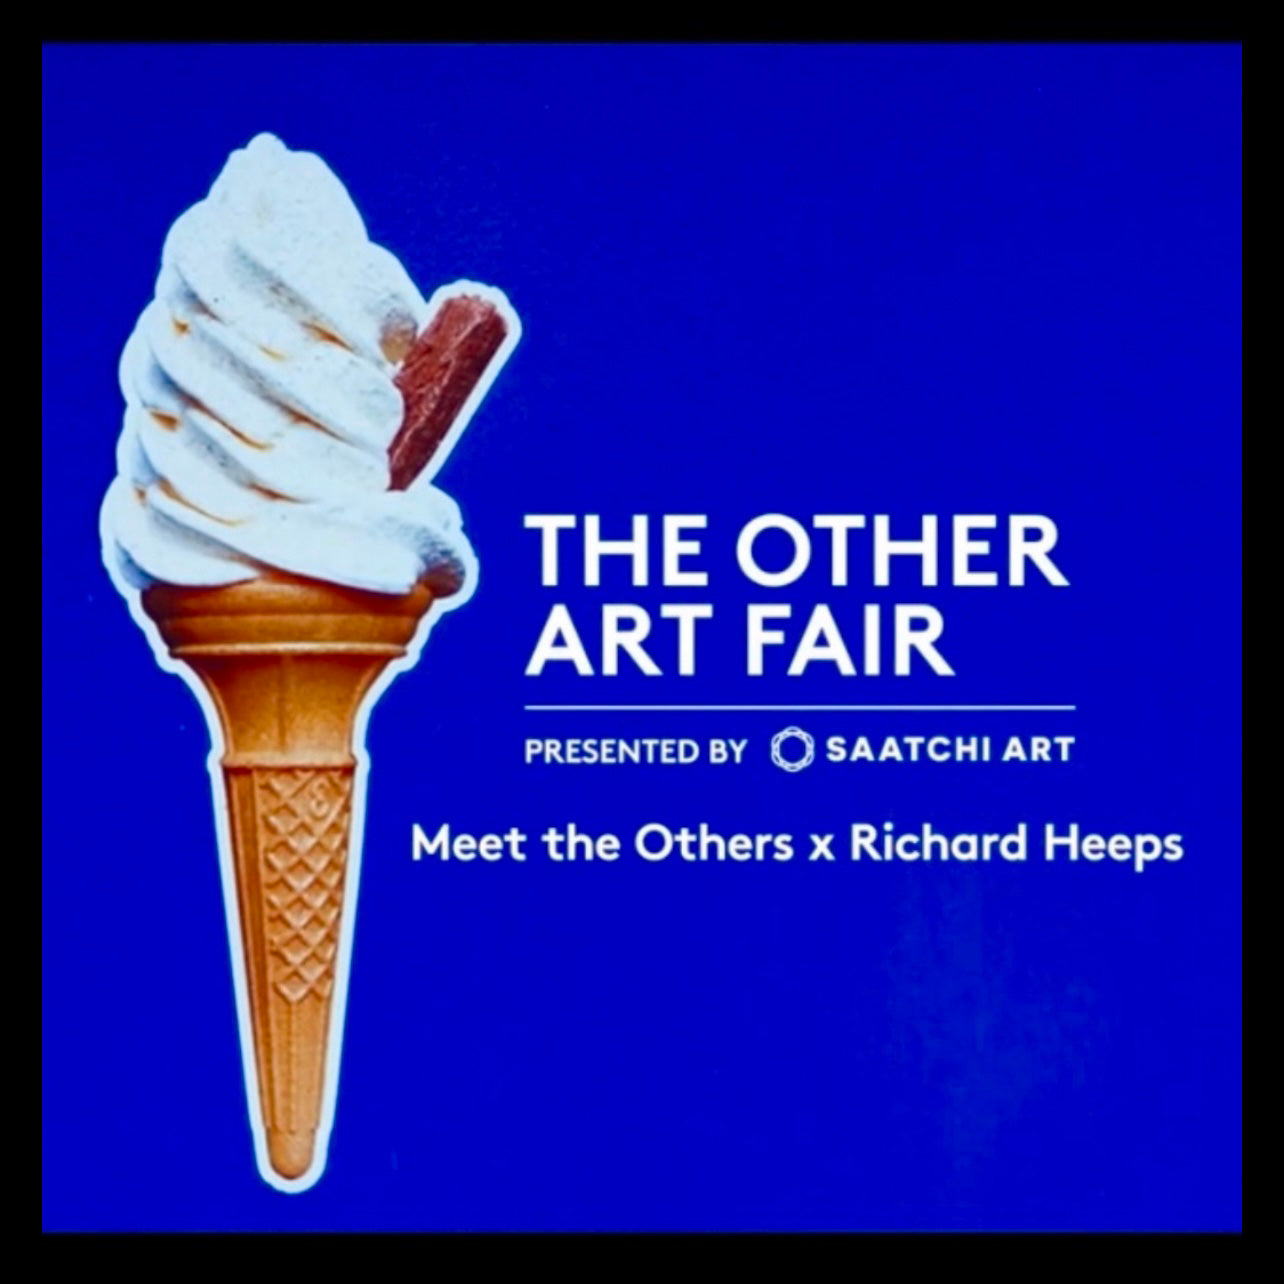 The Other Art Fair artist interview with Richard Heeps on YouTube